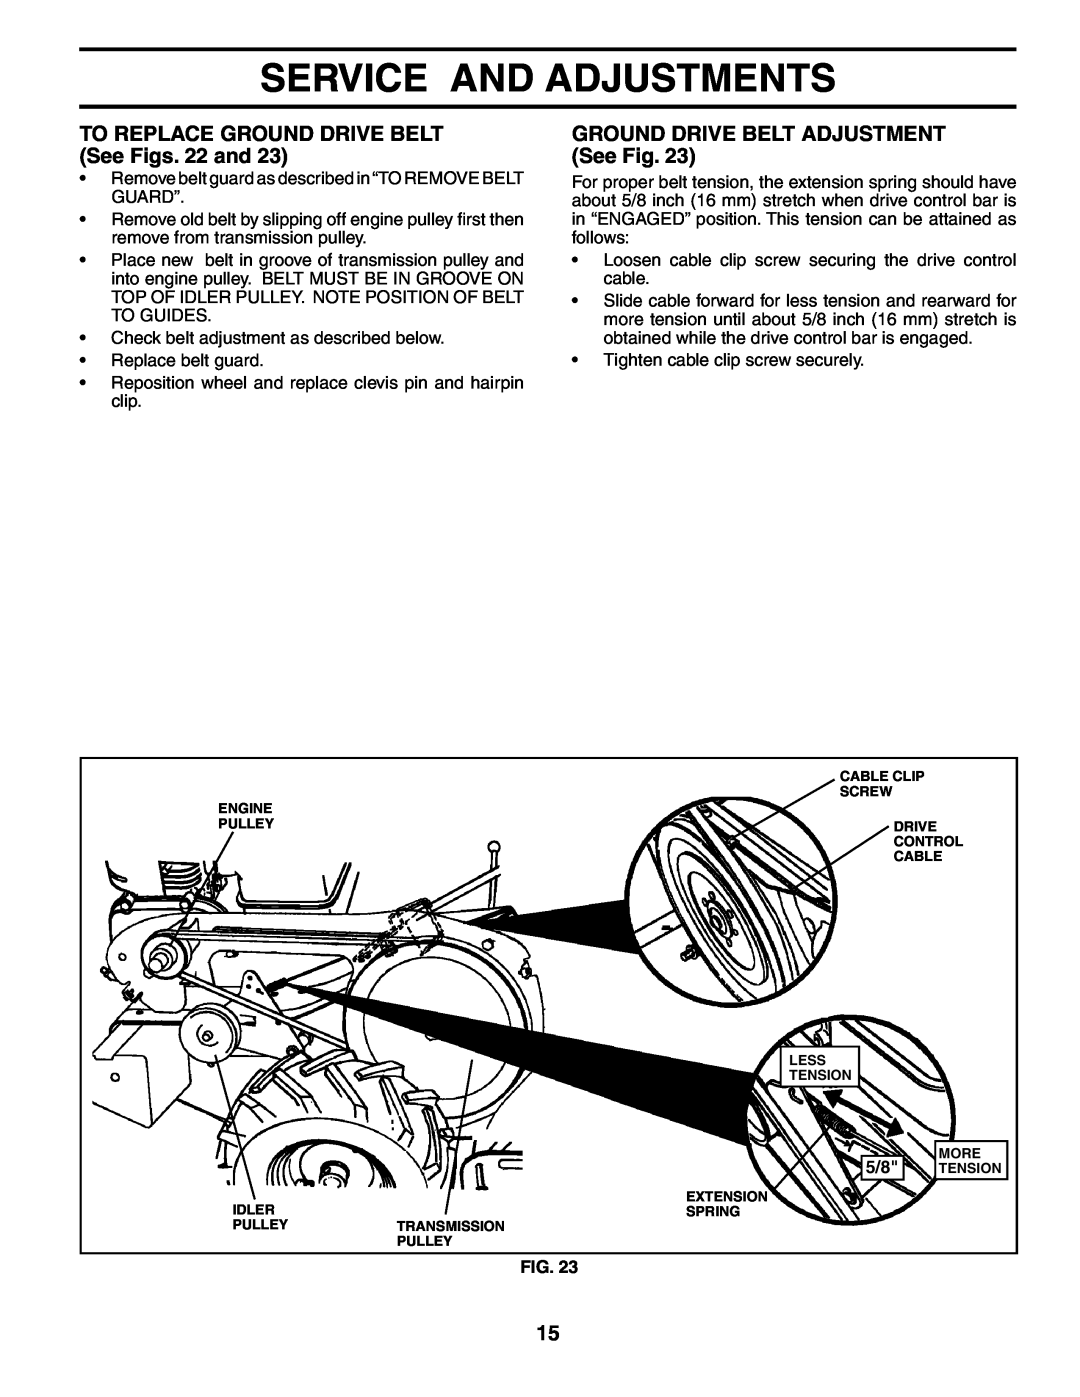 Poulan PRRT65C owner manual TO REPLACE GROUND DRIVE BELT See Figs. 22 and, GROUND DRIVE BELT ADJUSTMENT See Fig 